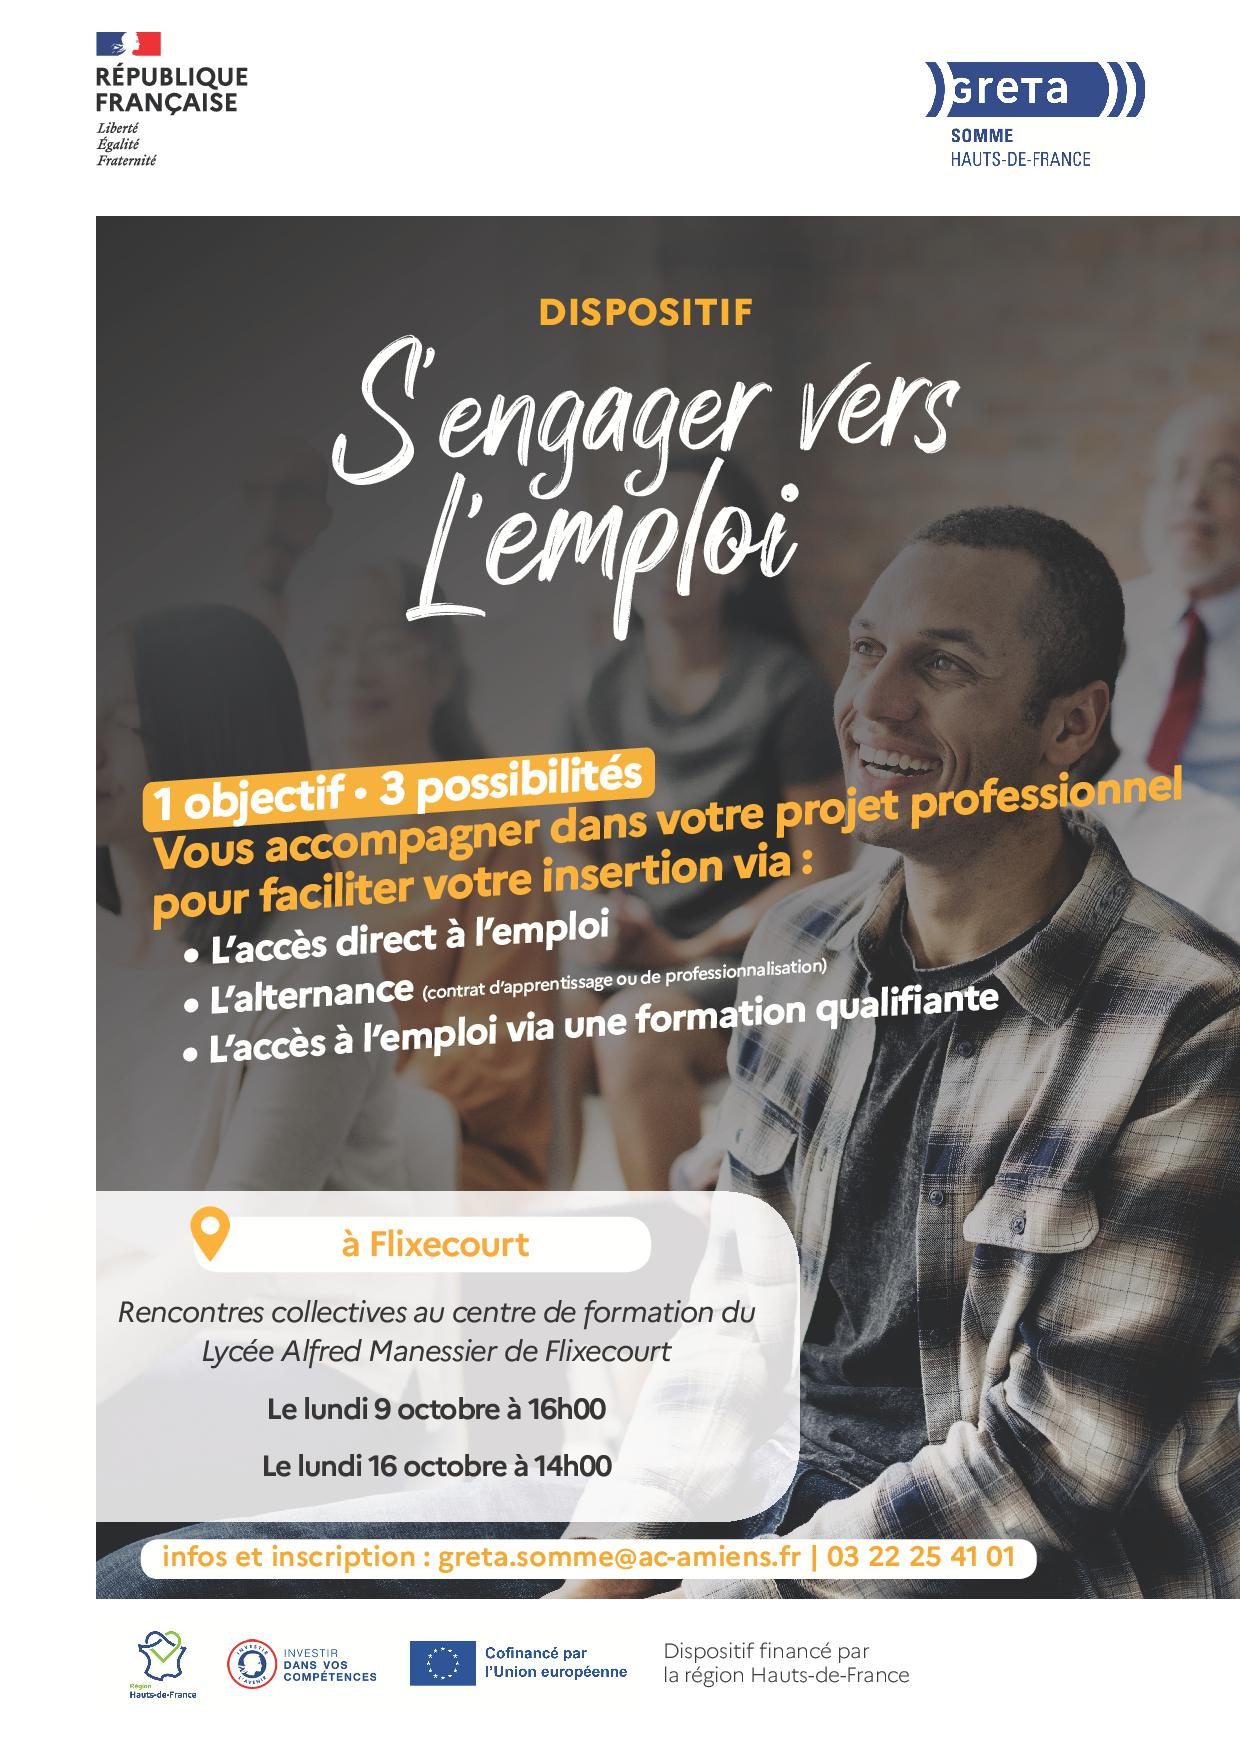 S’engager vers l’emploi !